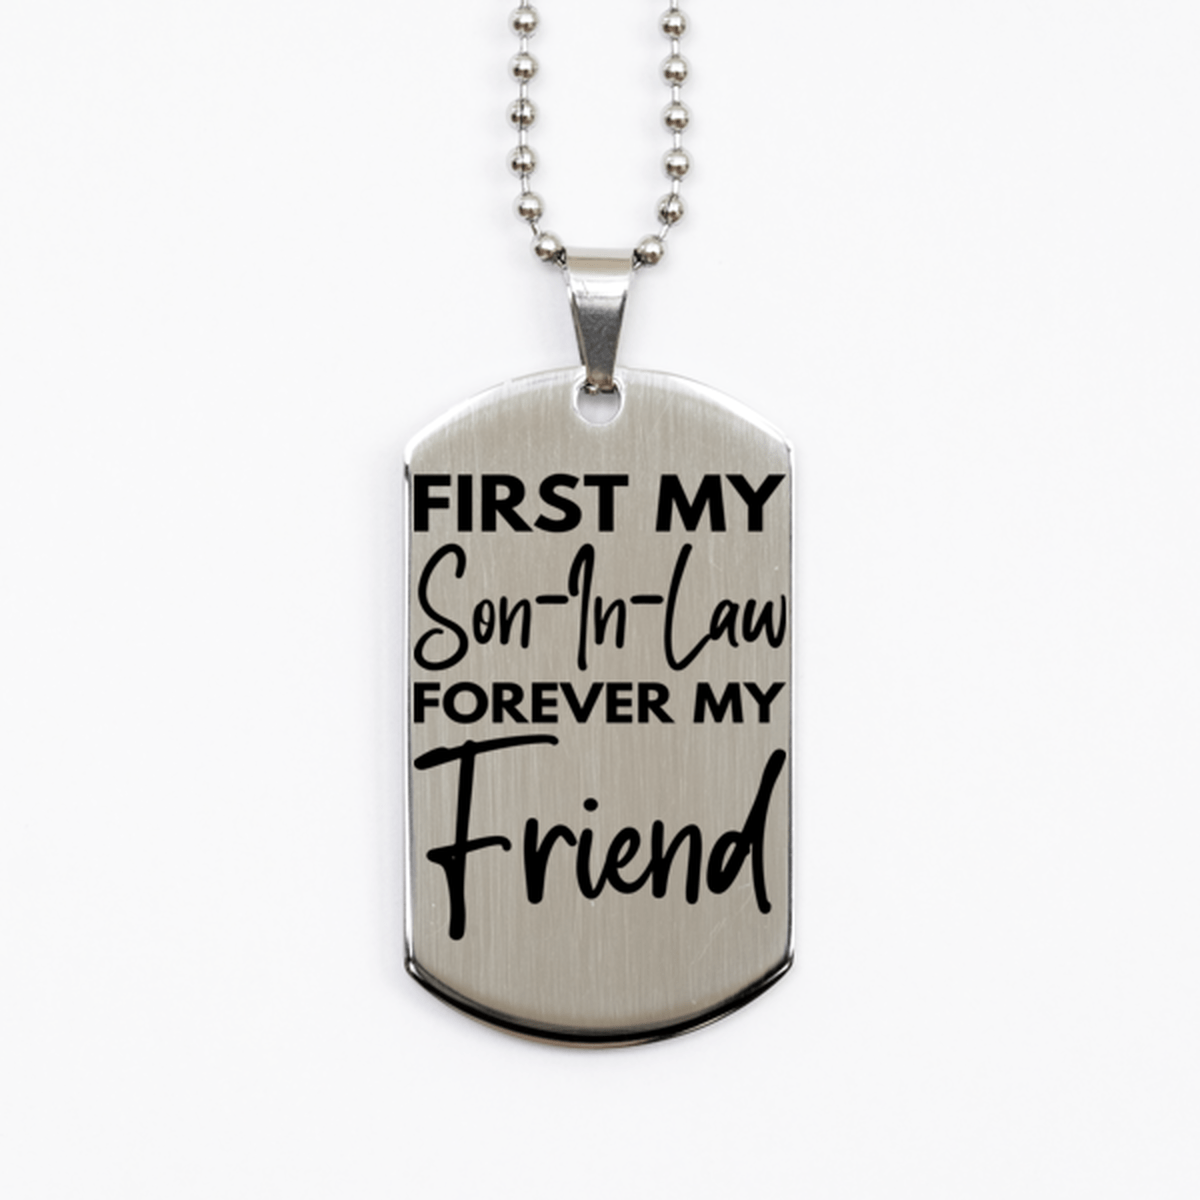 Inspirational Son-In-Law Silver Dog Tag Necklace, First My Son-In-Law Forever My Friend, Best Birthday Gifts for Son-In-Law